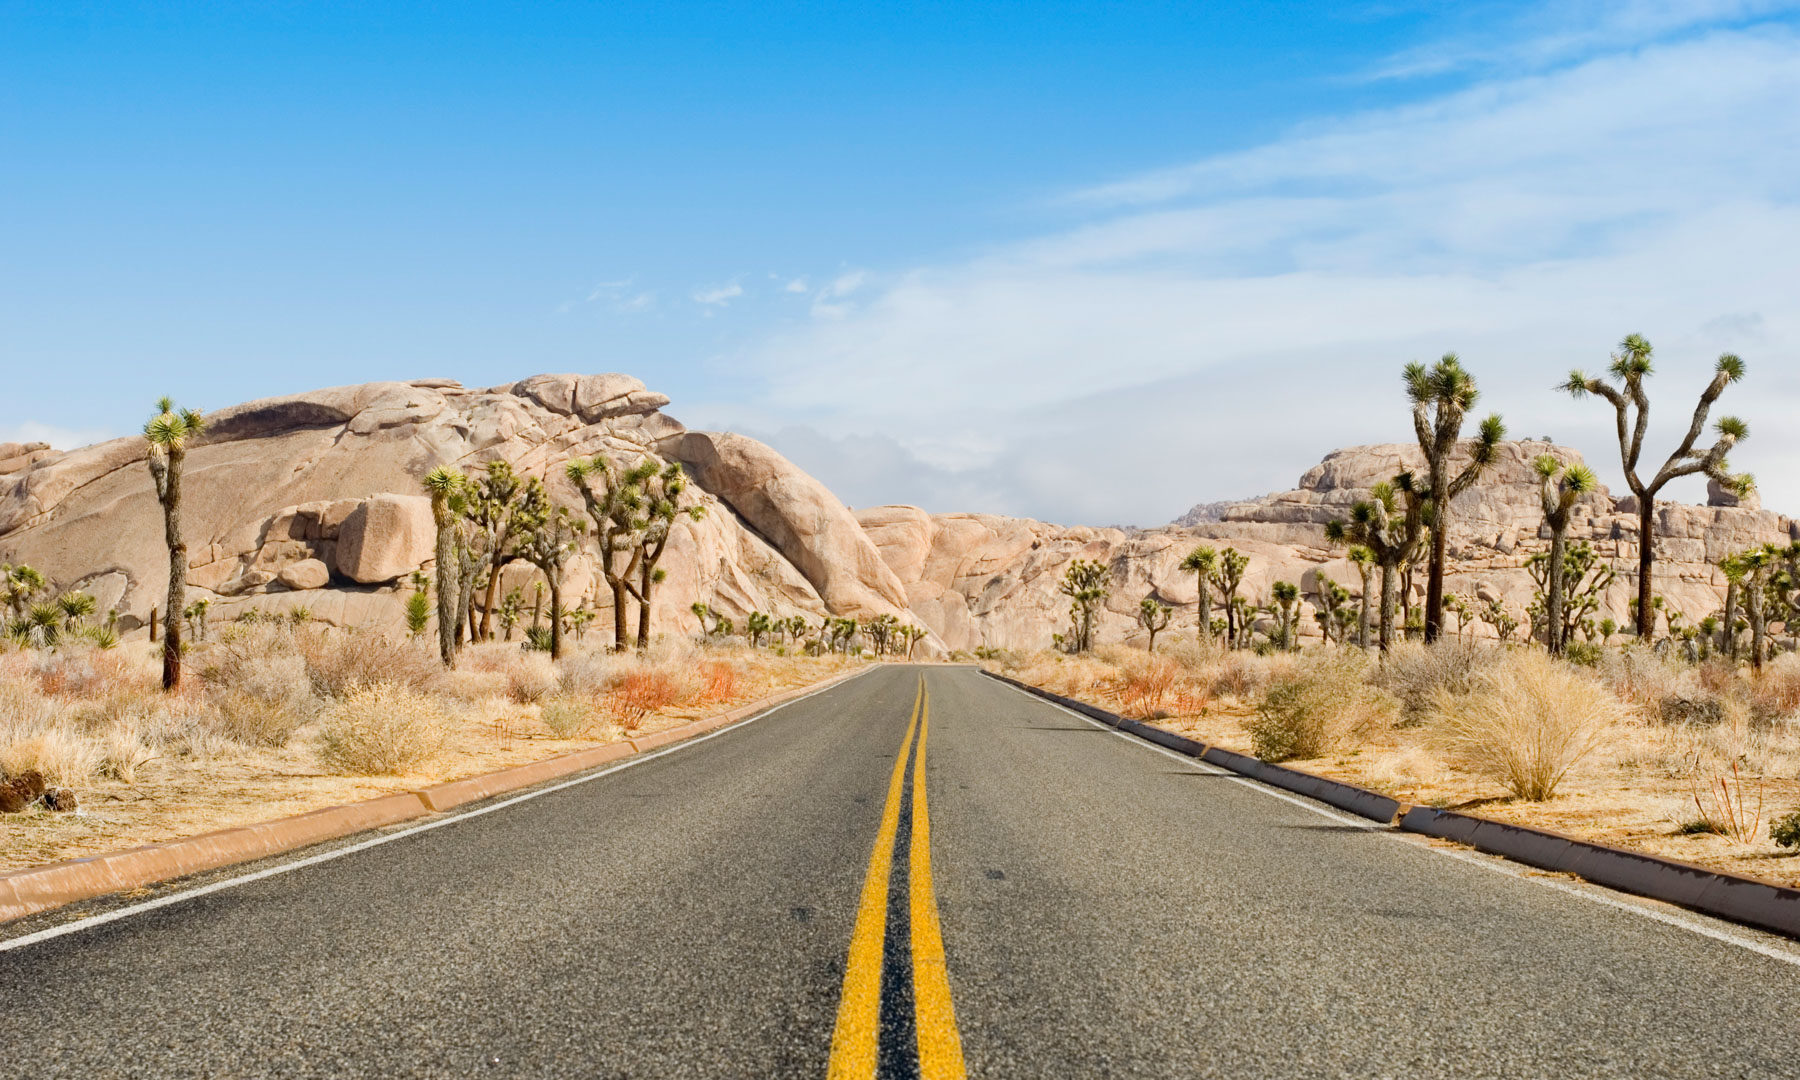 The Best Things to do in Joshua Tree National Park